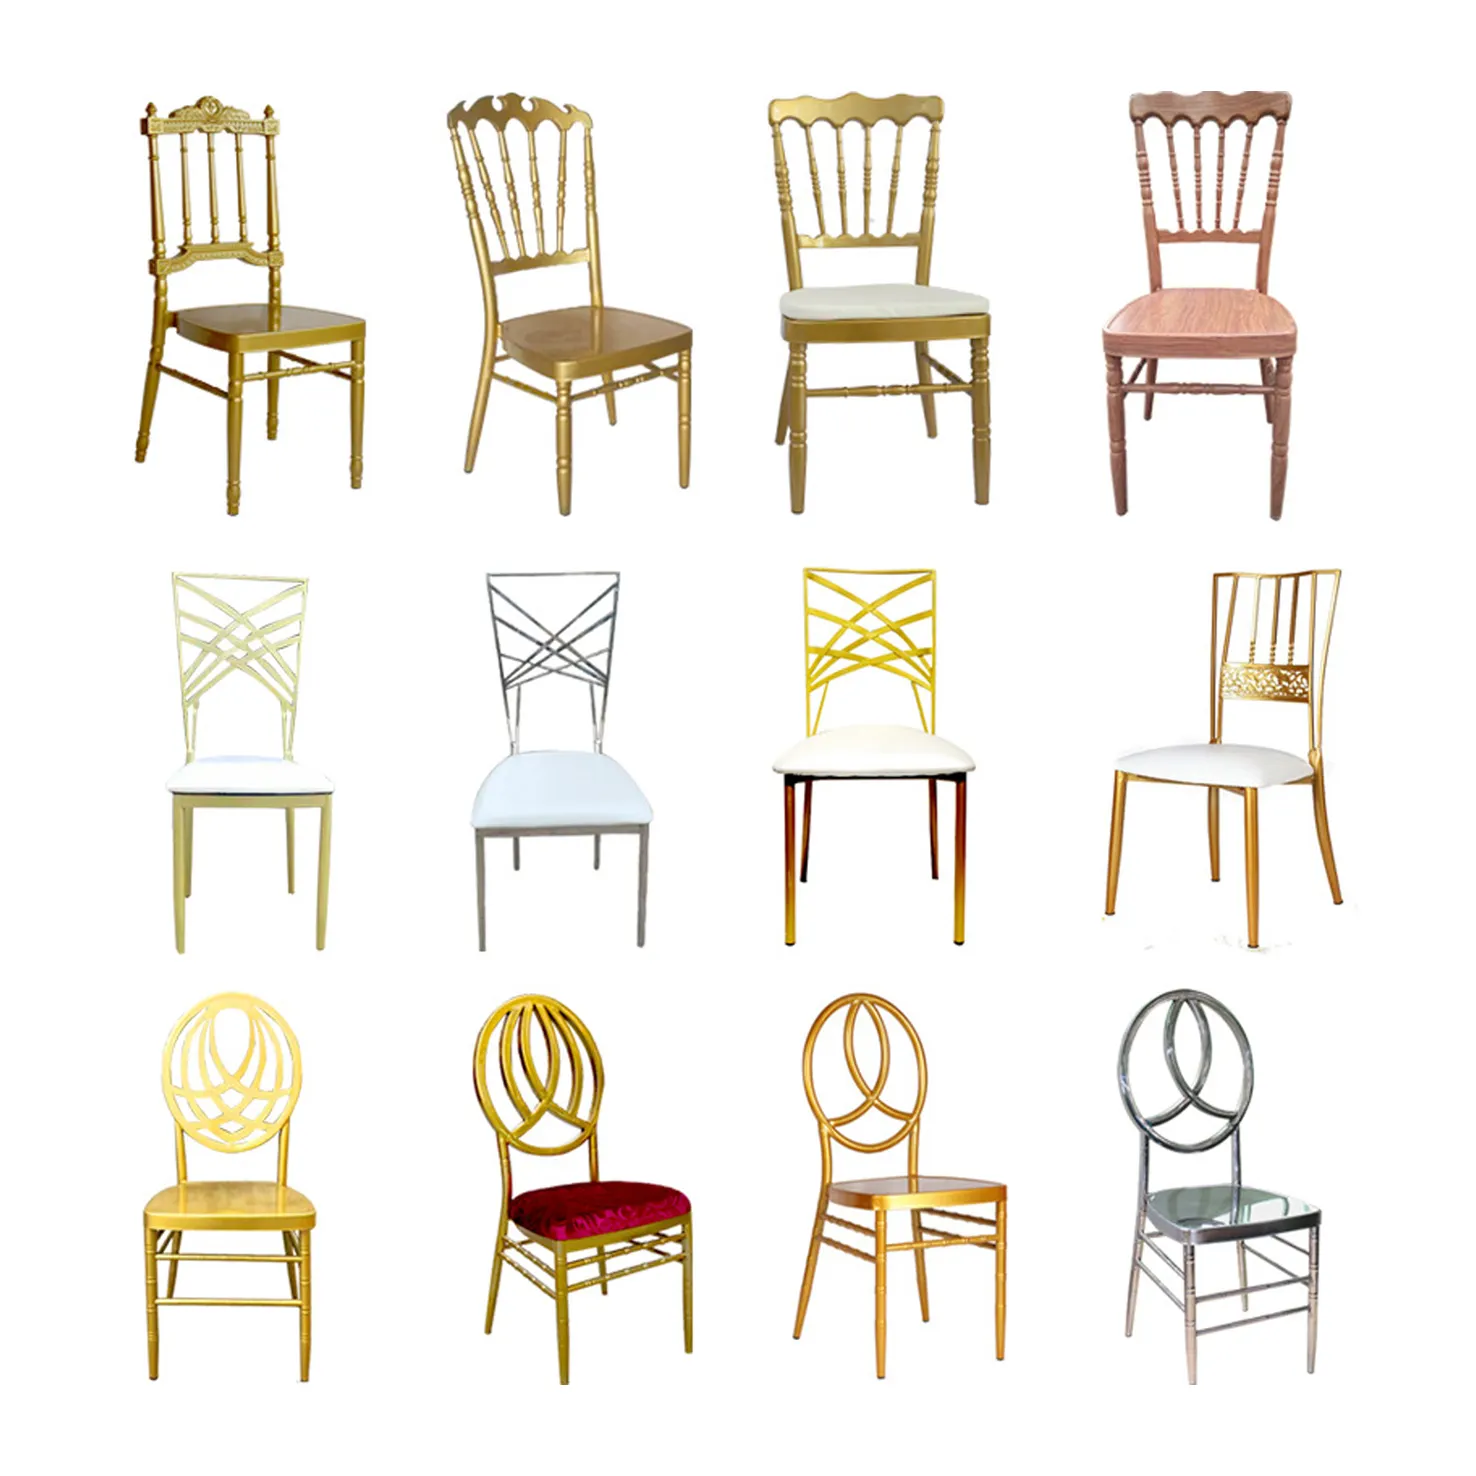 Bnquet Hotel Chairs Cheap Price Pp Cross Back Acrylic Plastic Modern Dining Restaurant for Events Wedding Party Metal Nova Chair